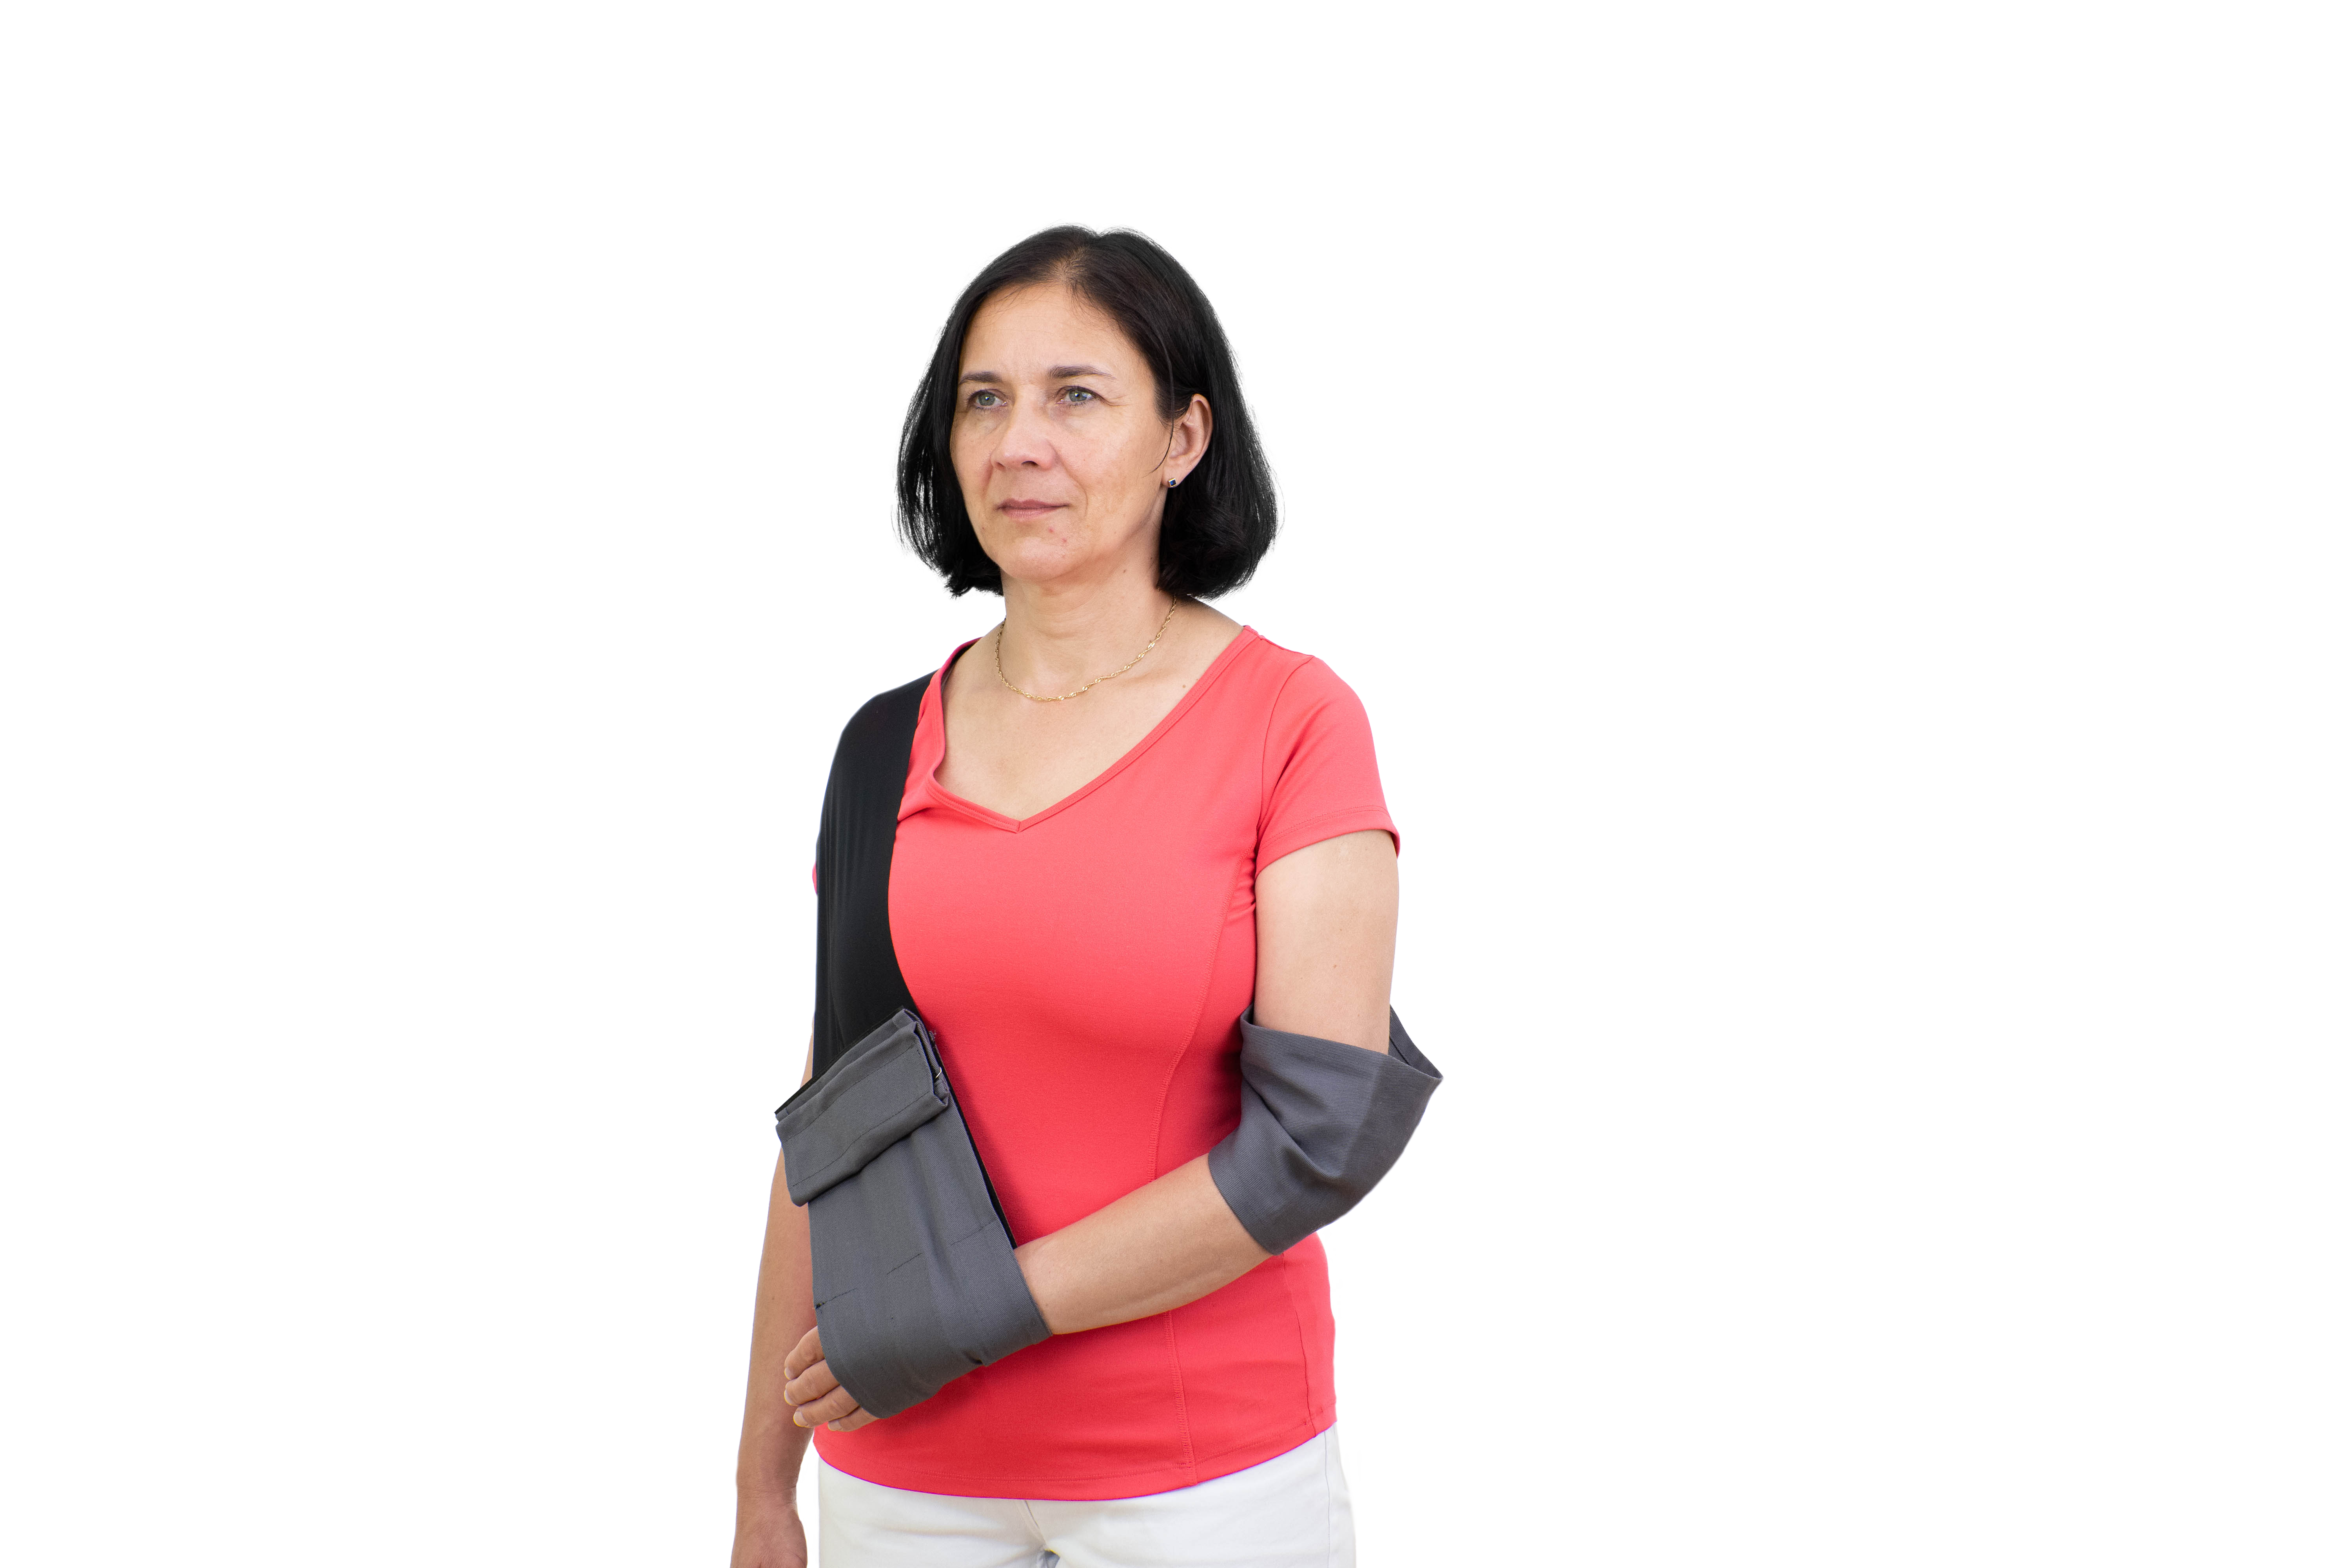 Sling for paretic limb - Special aid for patients after stroke or brachial plexus injury